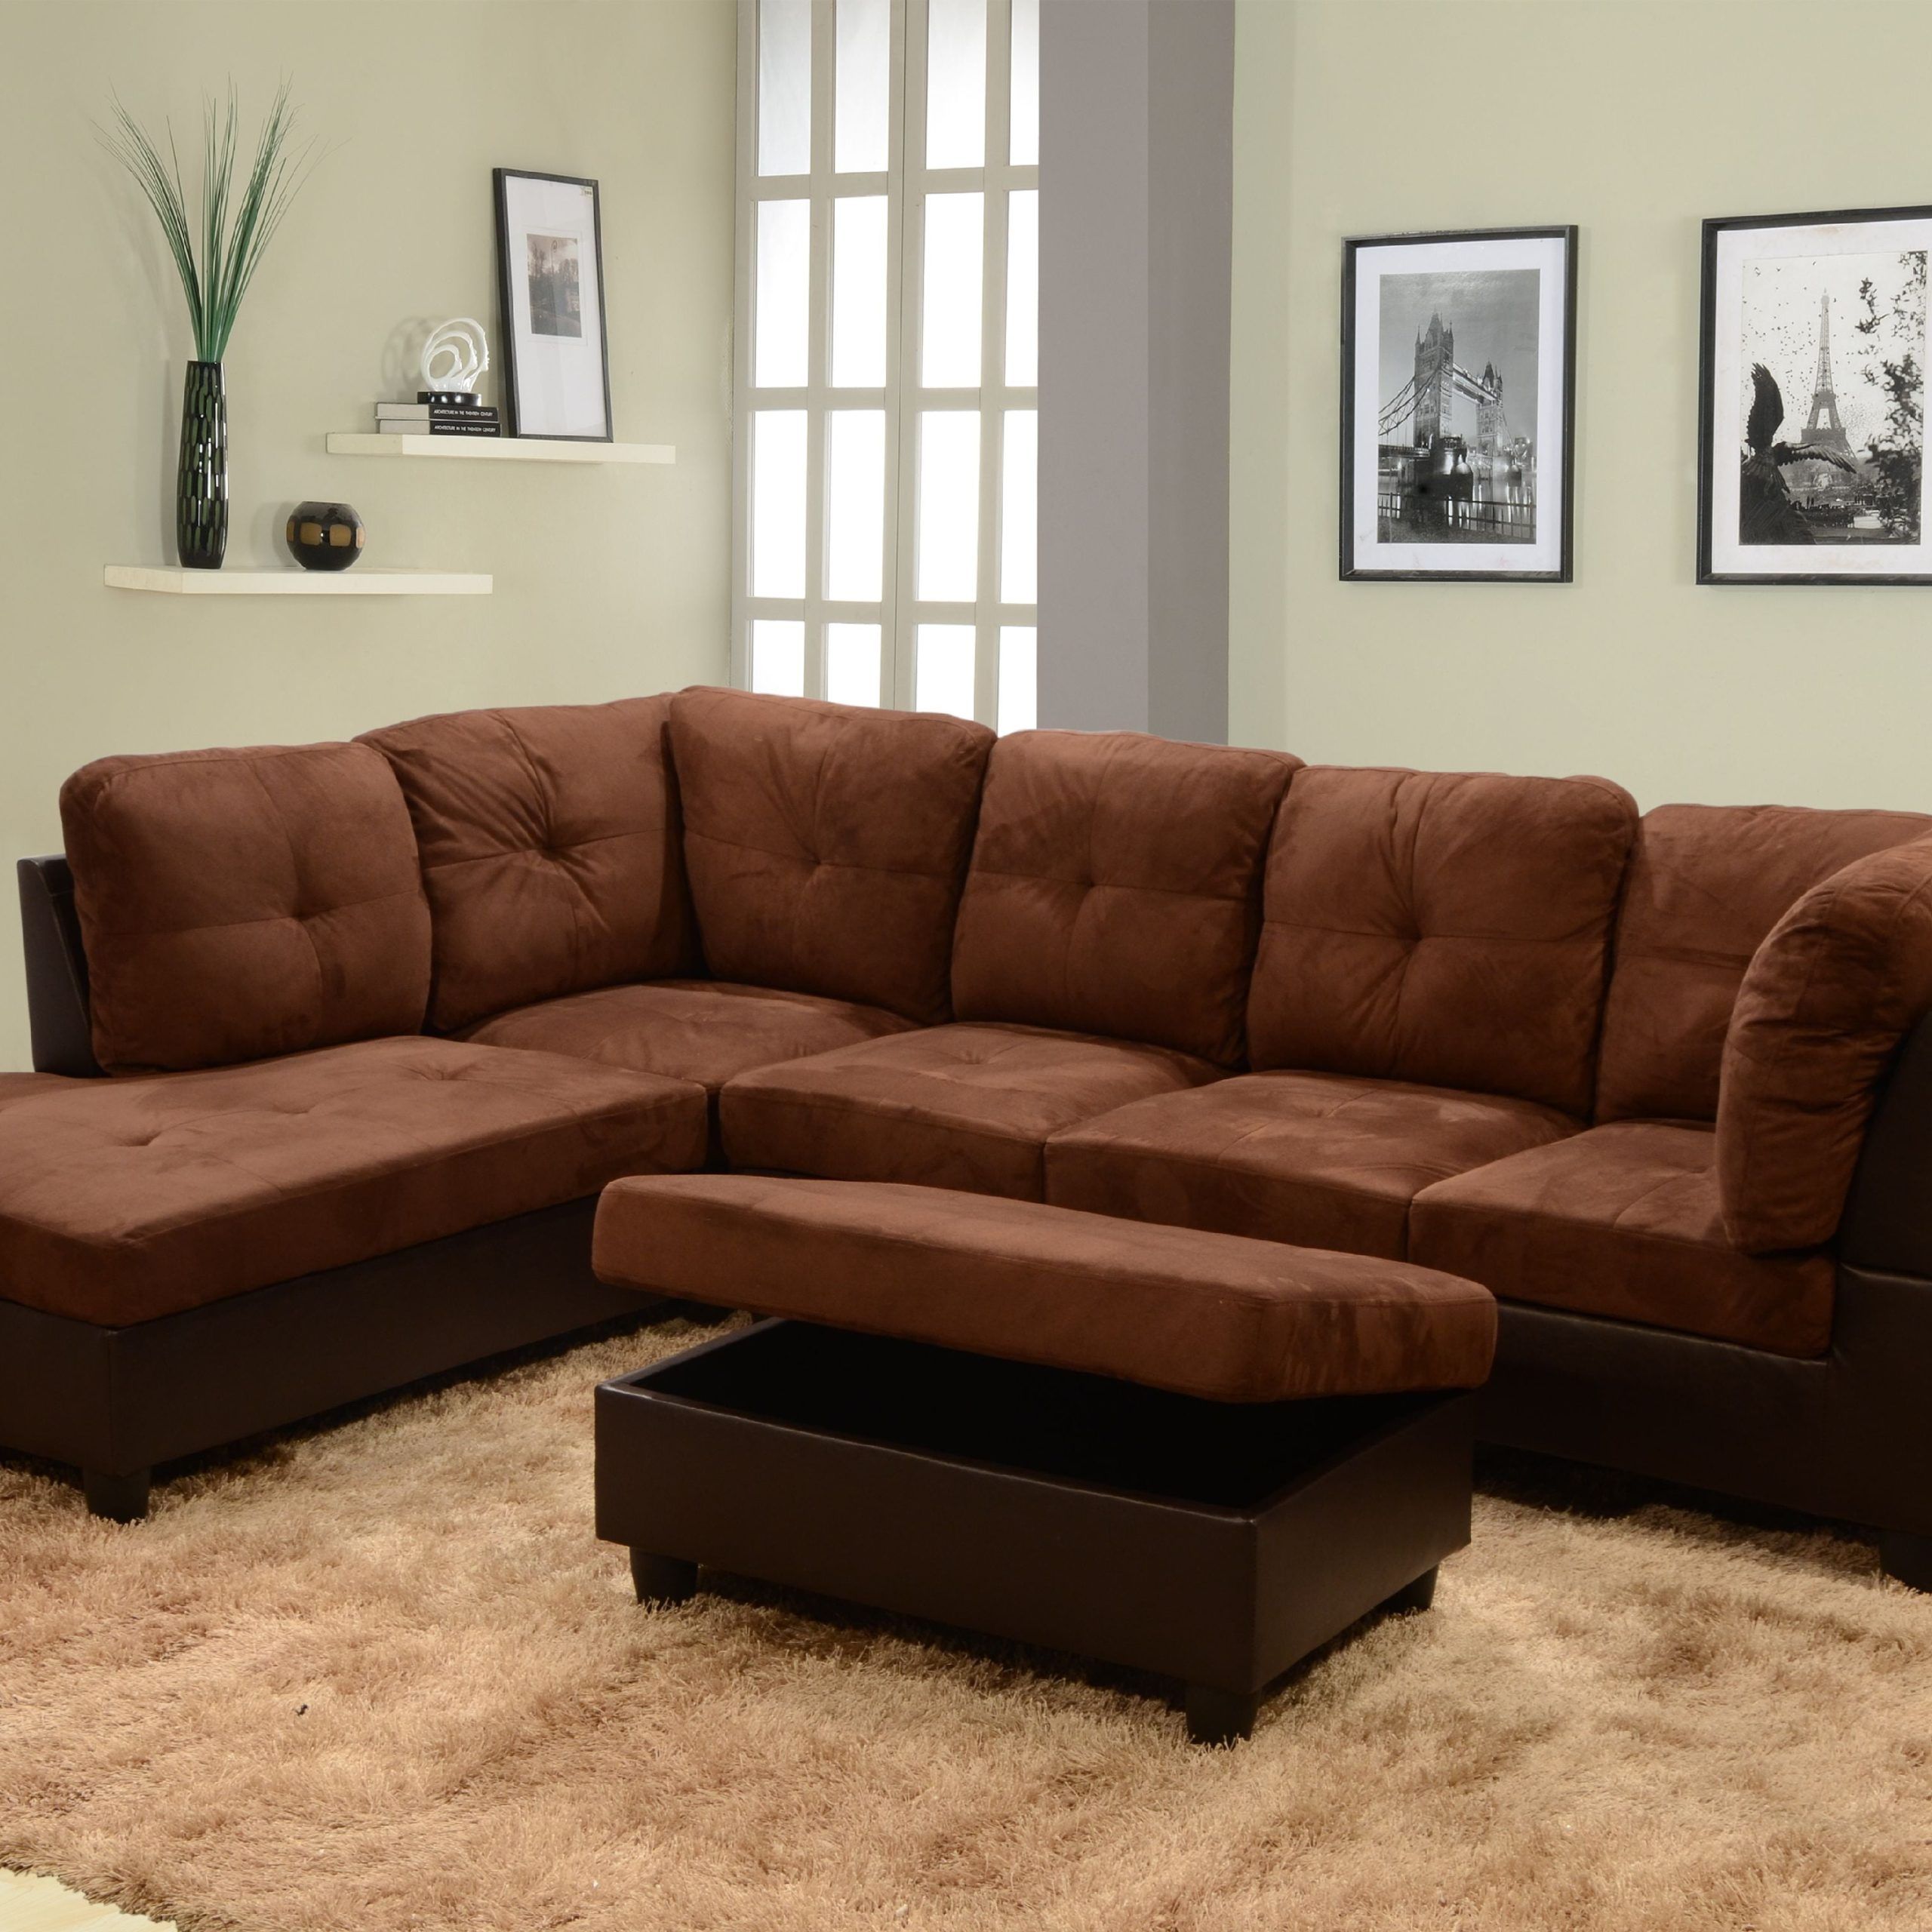 Matt Right Facing Sectional Sofa With Ottoman,chocolate – Walmart In Sofas With Ottomans (View 3 of 20)